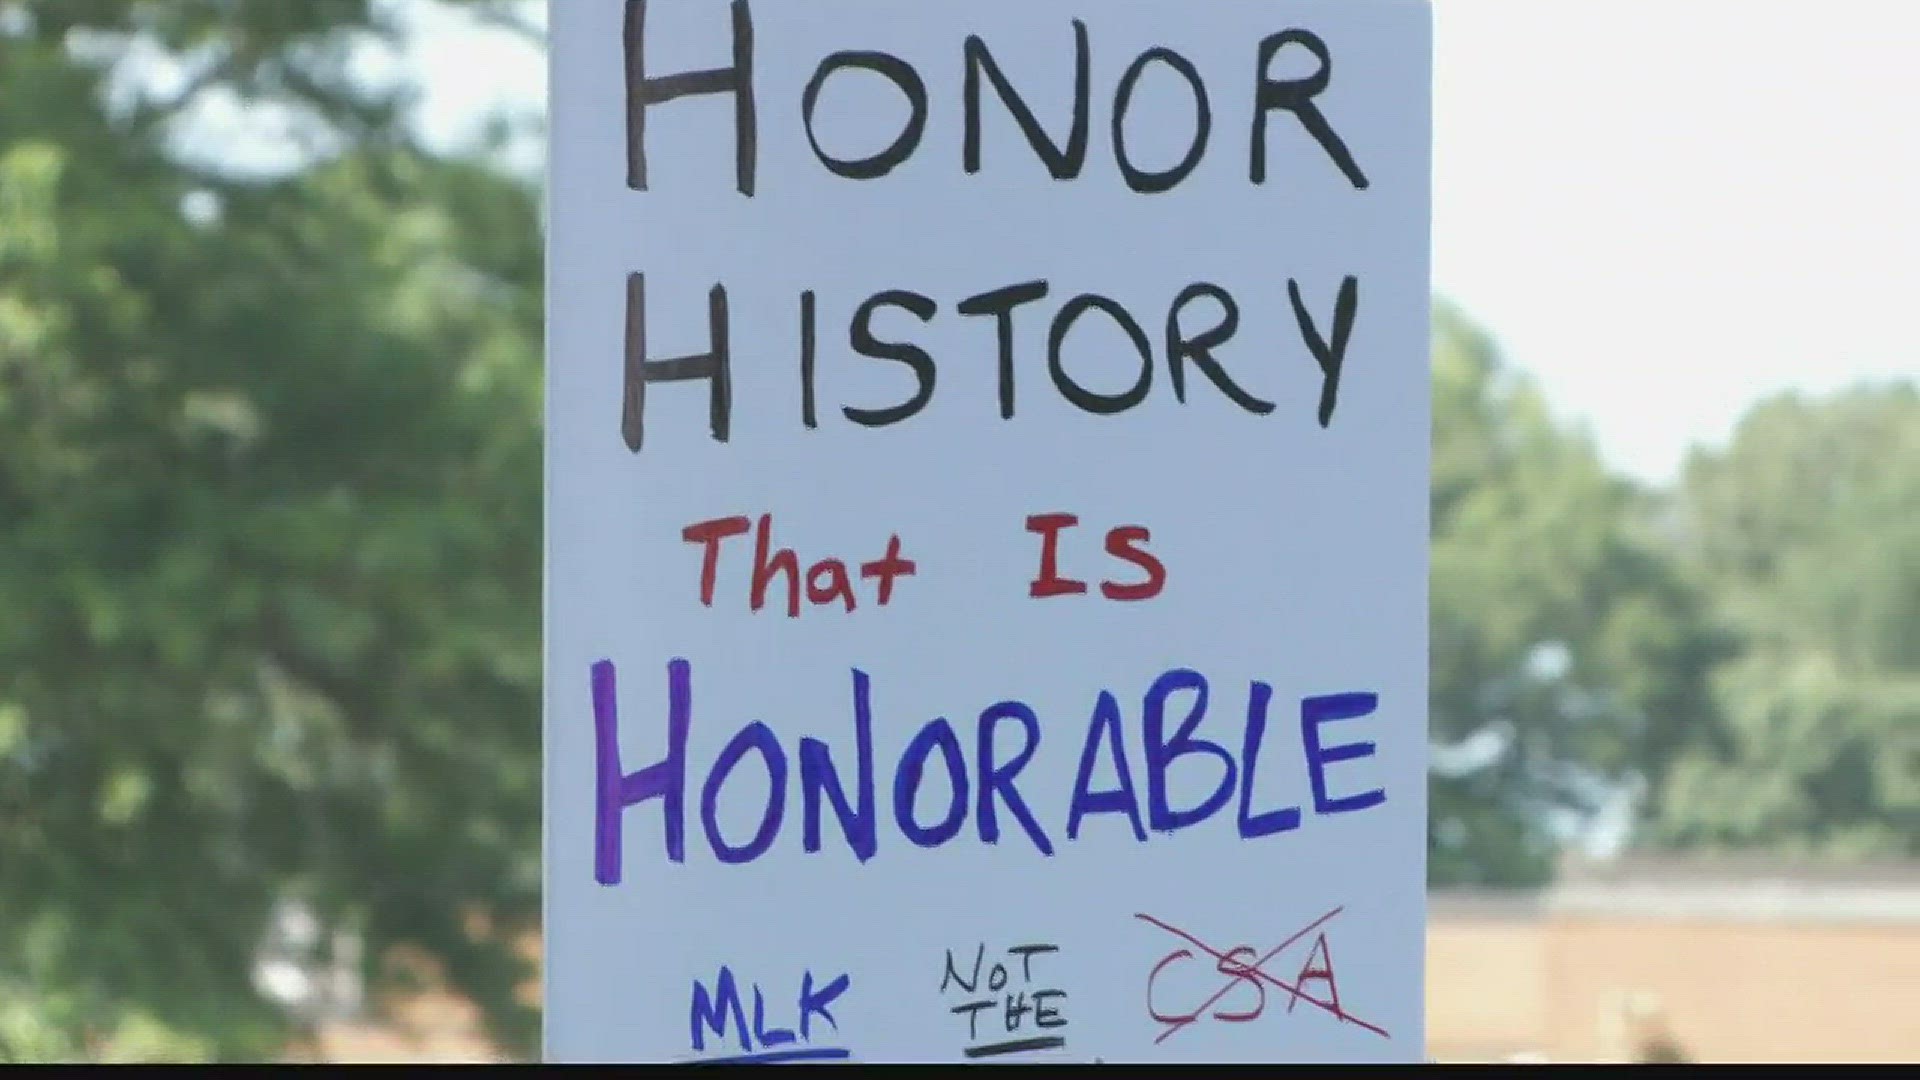 The Hampton branch of the NAACP and other local groups held a rally Sunday to support the name change at the Jefferson Davis Middle School. They also want a new name for the Campus at Lee, which is named after Gen. Robert E. Lee.